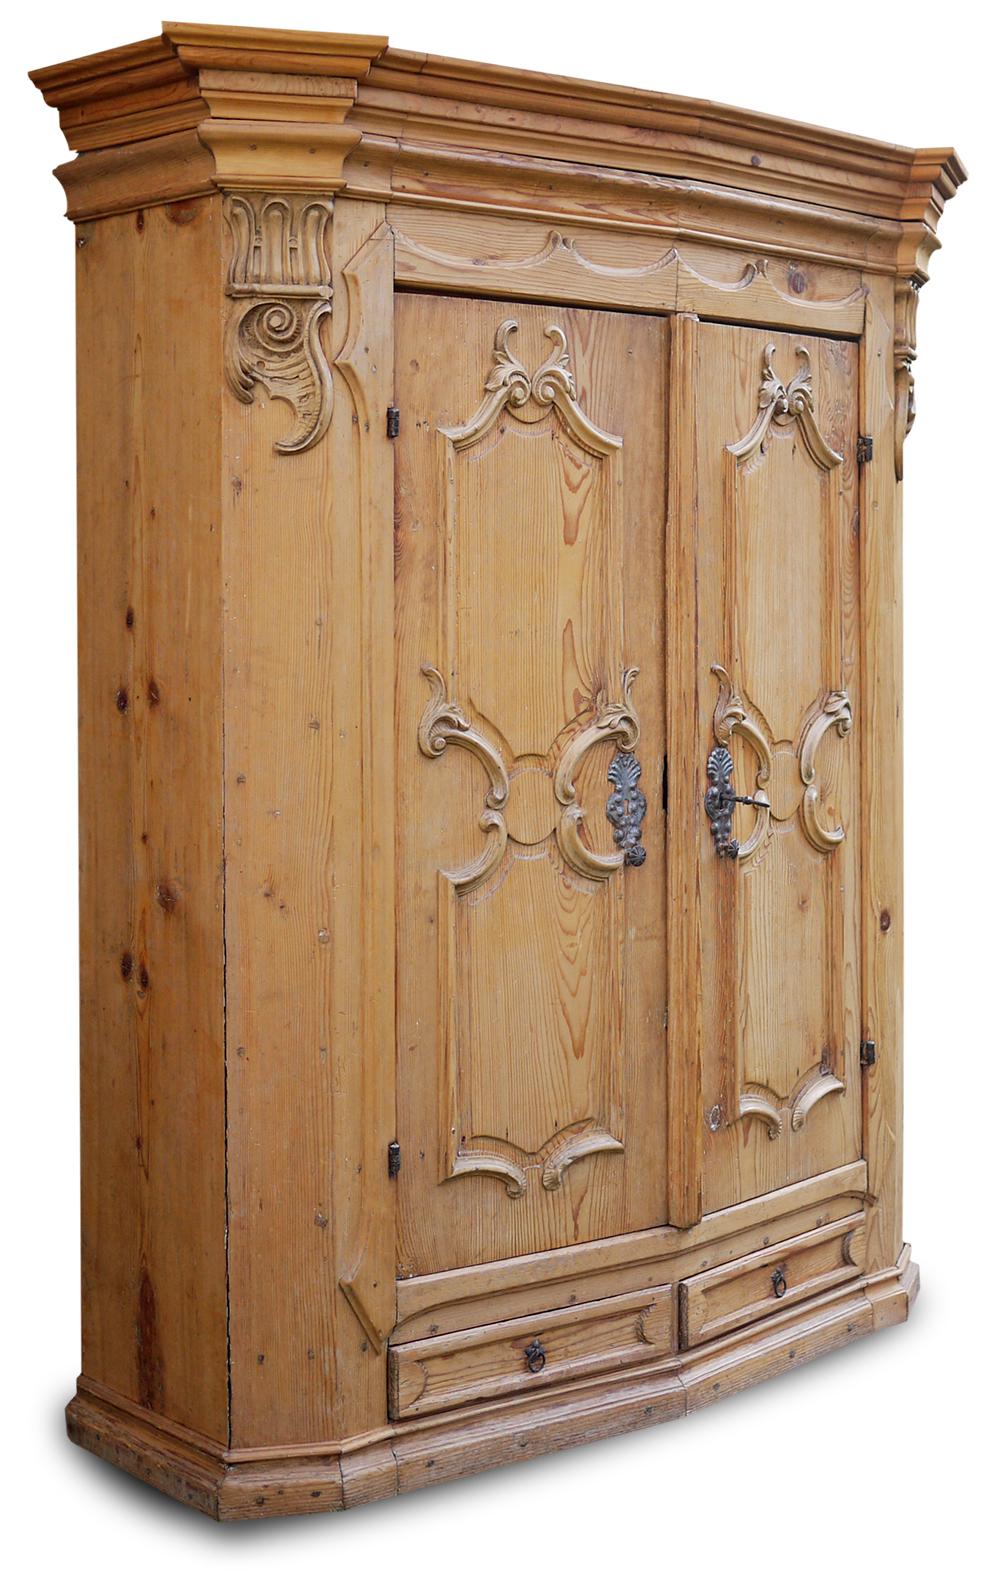 Antique Tyrolean (Northern Italy) carved wardrobe, mid-18th century

Measures: H. 187cm, L. 156cm, P. 60cm

Wardrobe with two doors and two drawers, notched, in fir wood. The front is slightly convex, a typical process in the area of?? Origin of